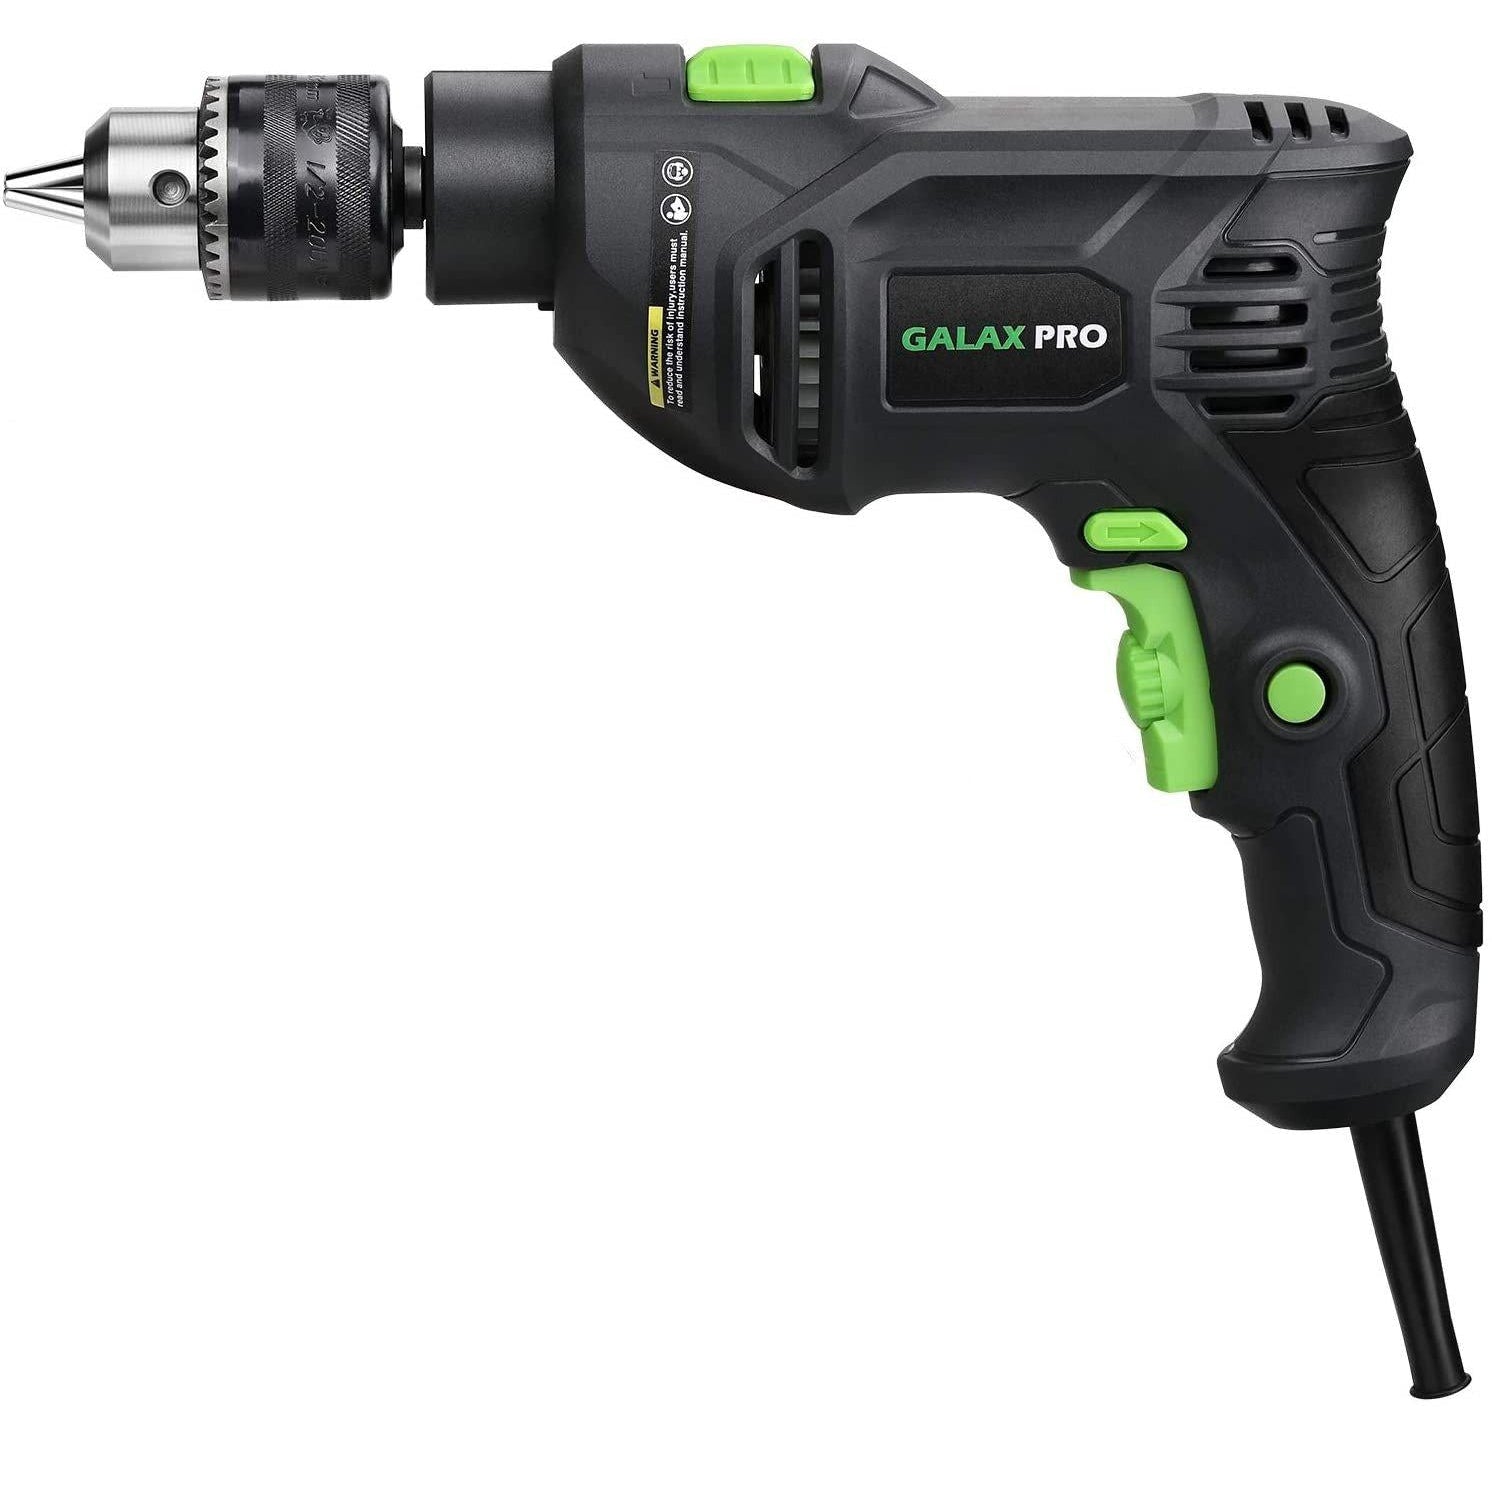 Galax Pro T0105 600W Impact Drill, 1/2-inch Corded Hammer Drill, Variable Speed 0-3000 RPM